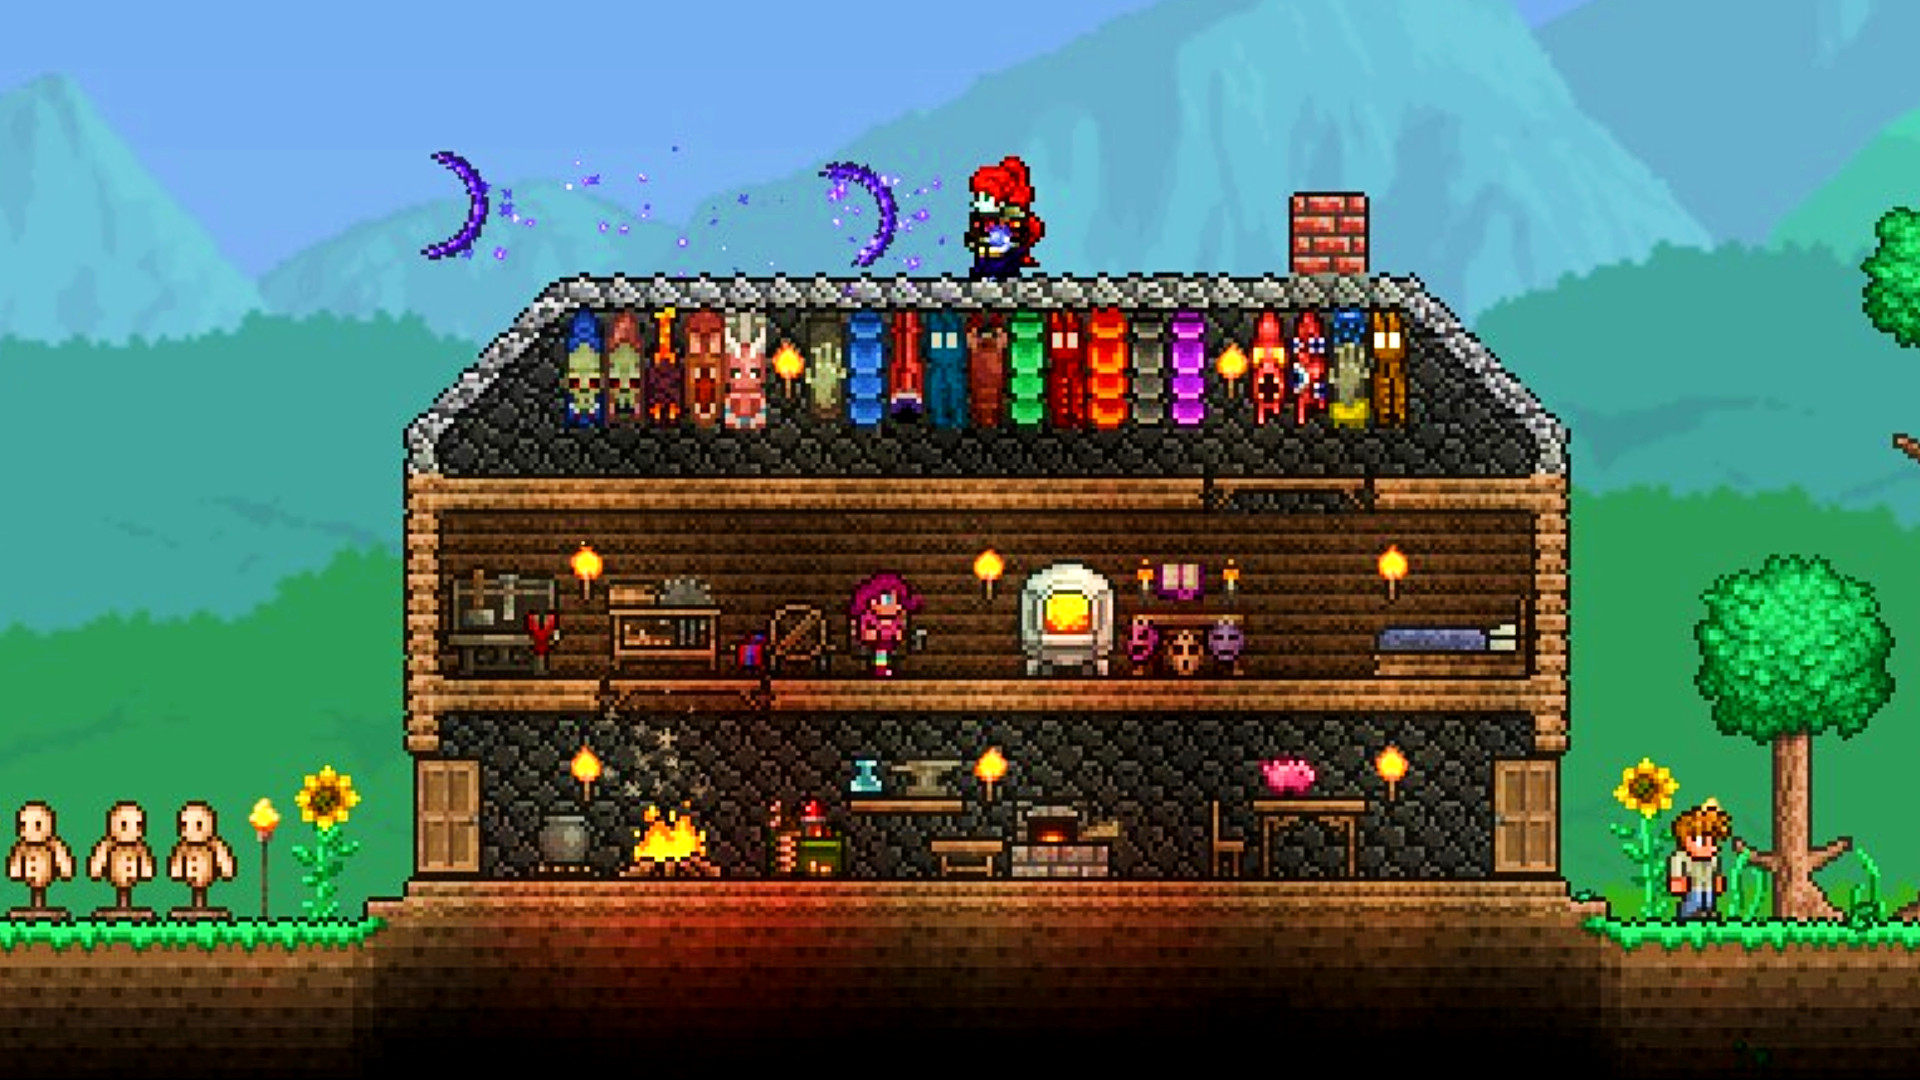 Terraria 1.4.4 “extremely close,” Void Bag update detailed